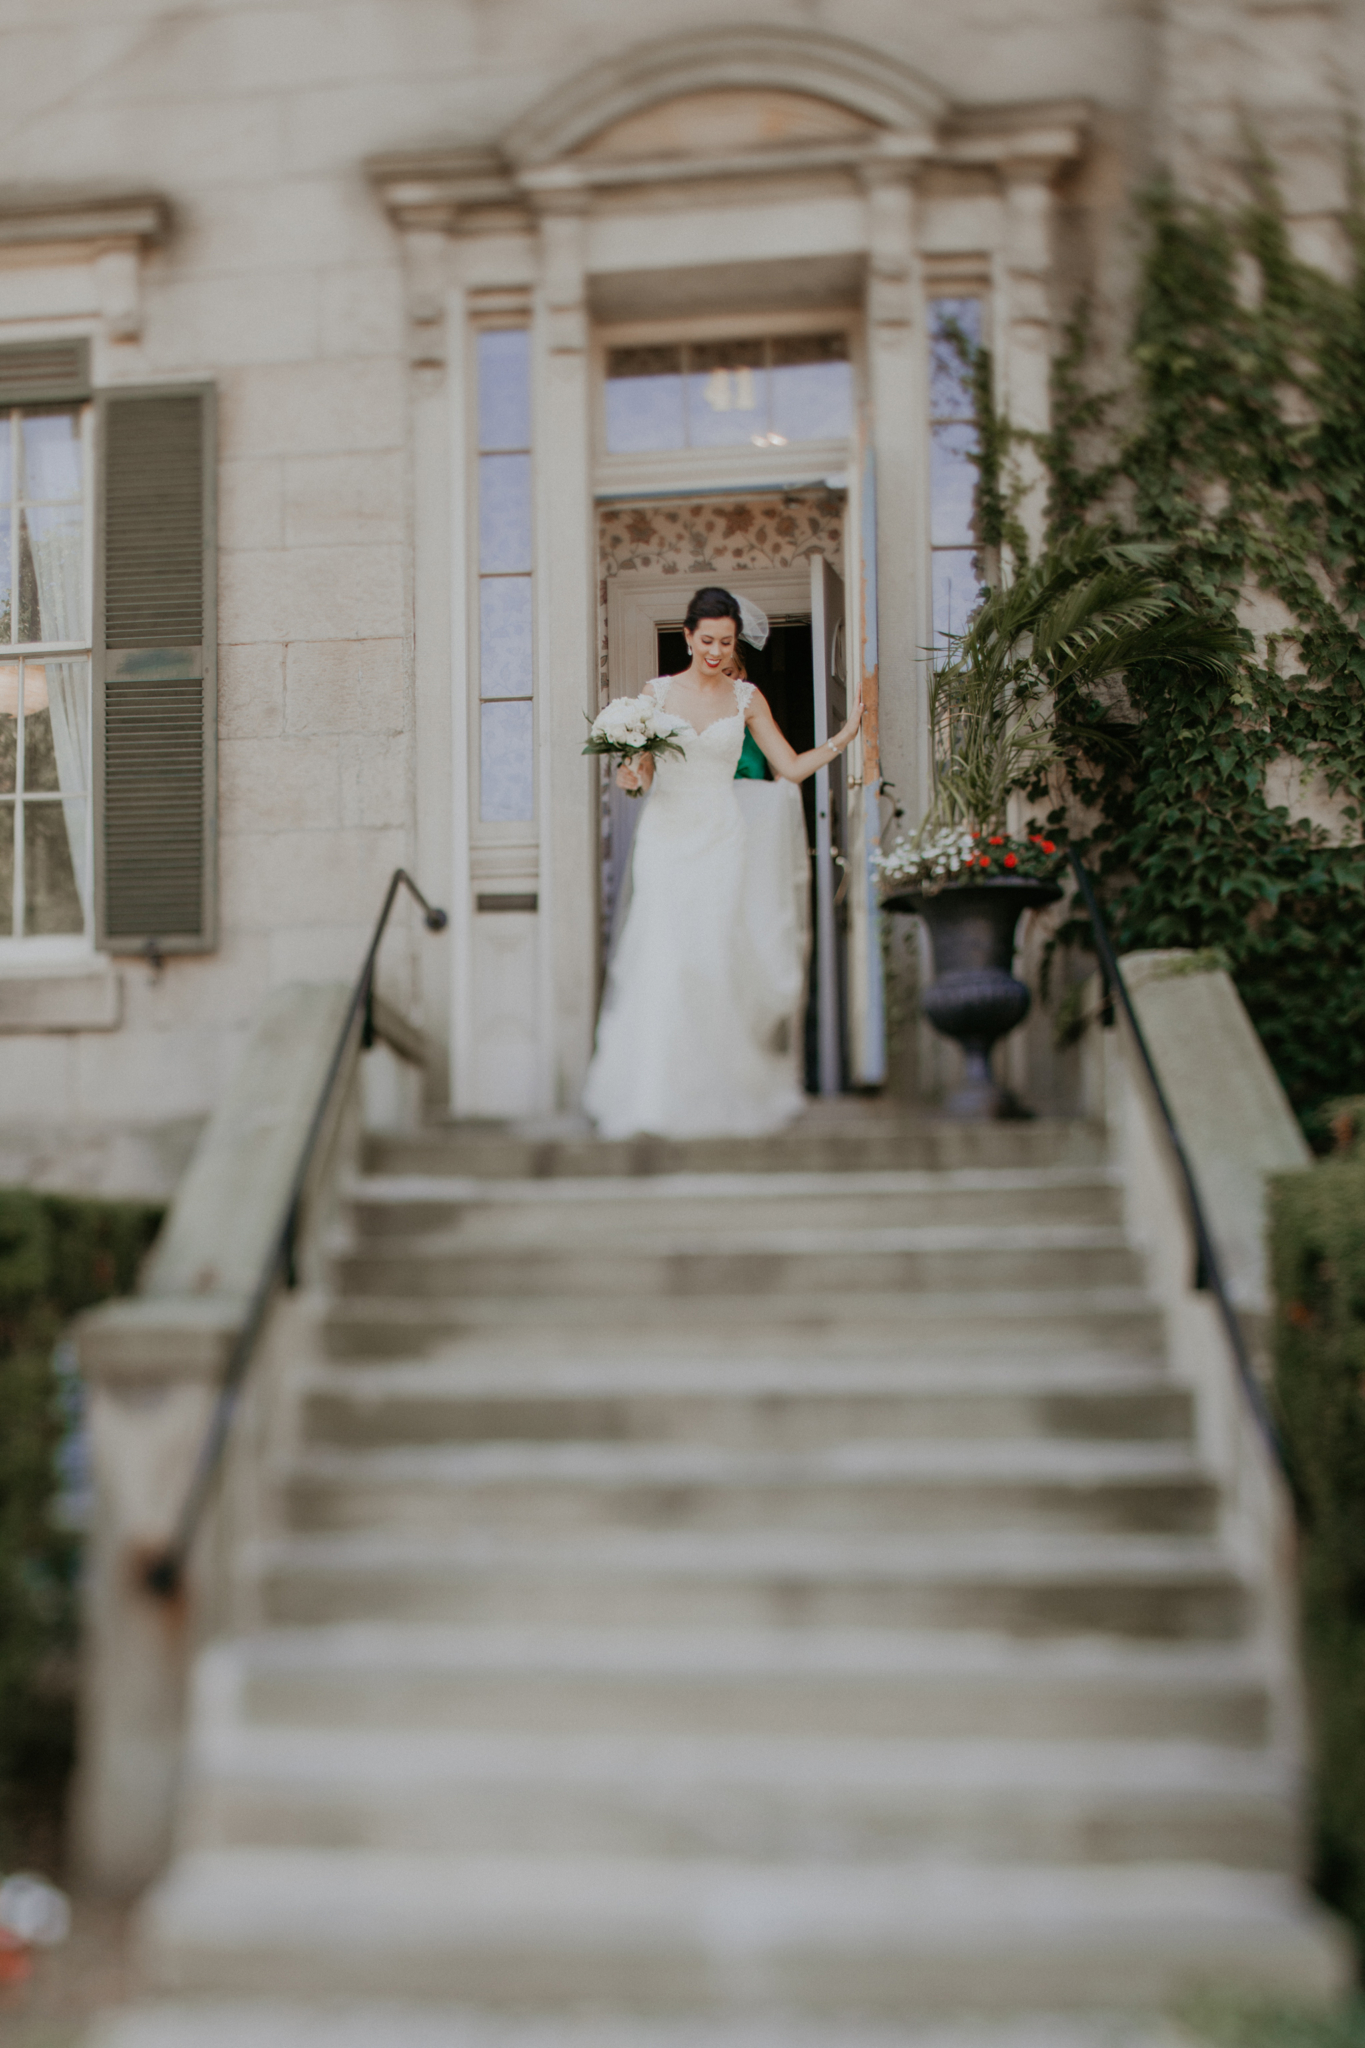 Bride walking down steps with bridesmaid on wedding day